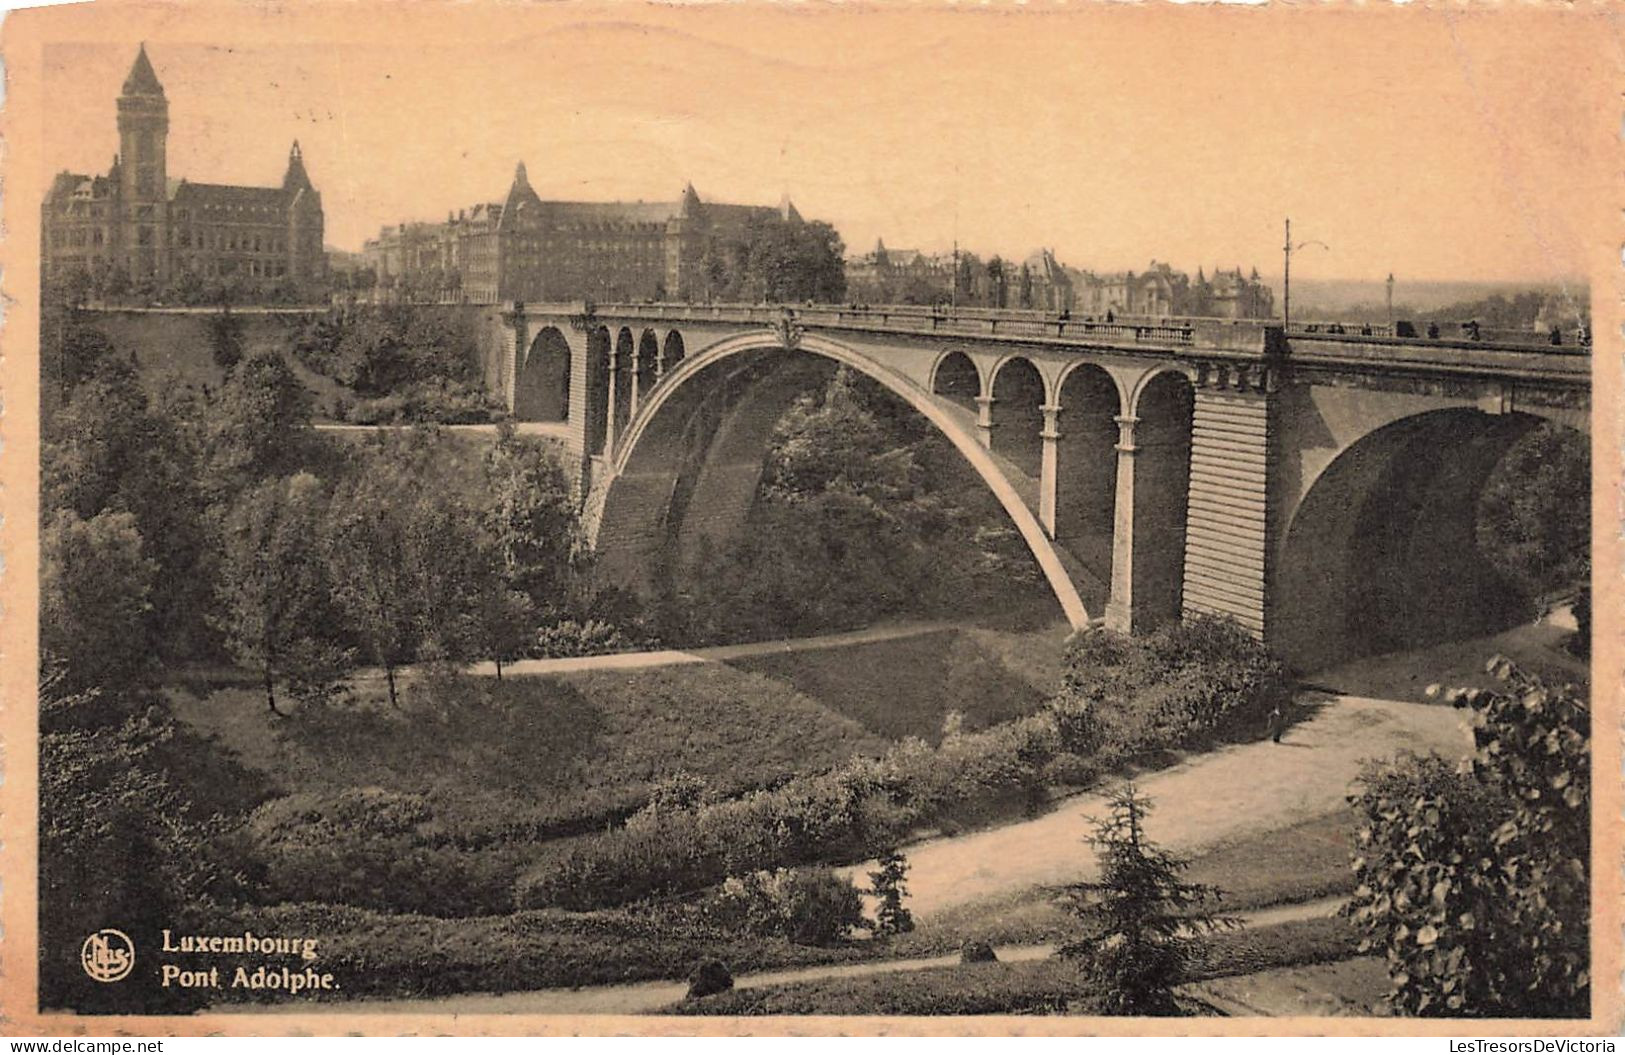 LUXEMBOURG - Luxembourg Ville - Pont Adolphe - Carte Postale Ancienne - Luxemburg - Stad